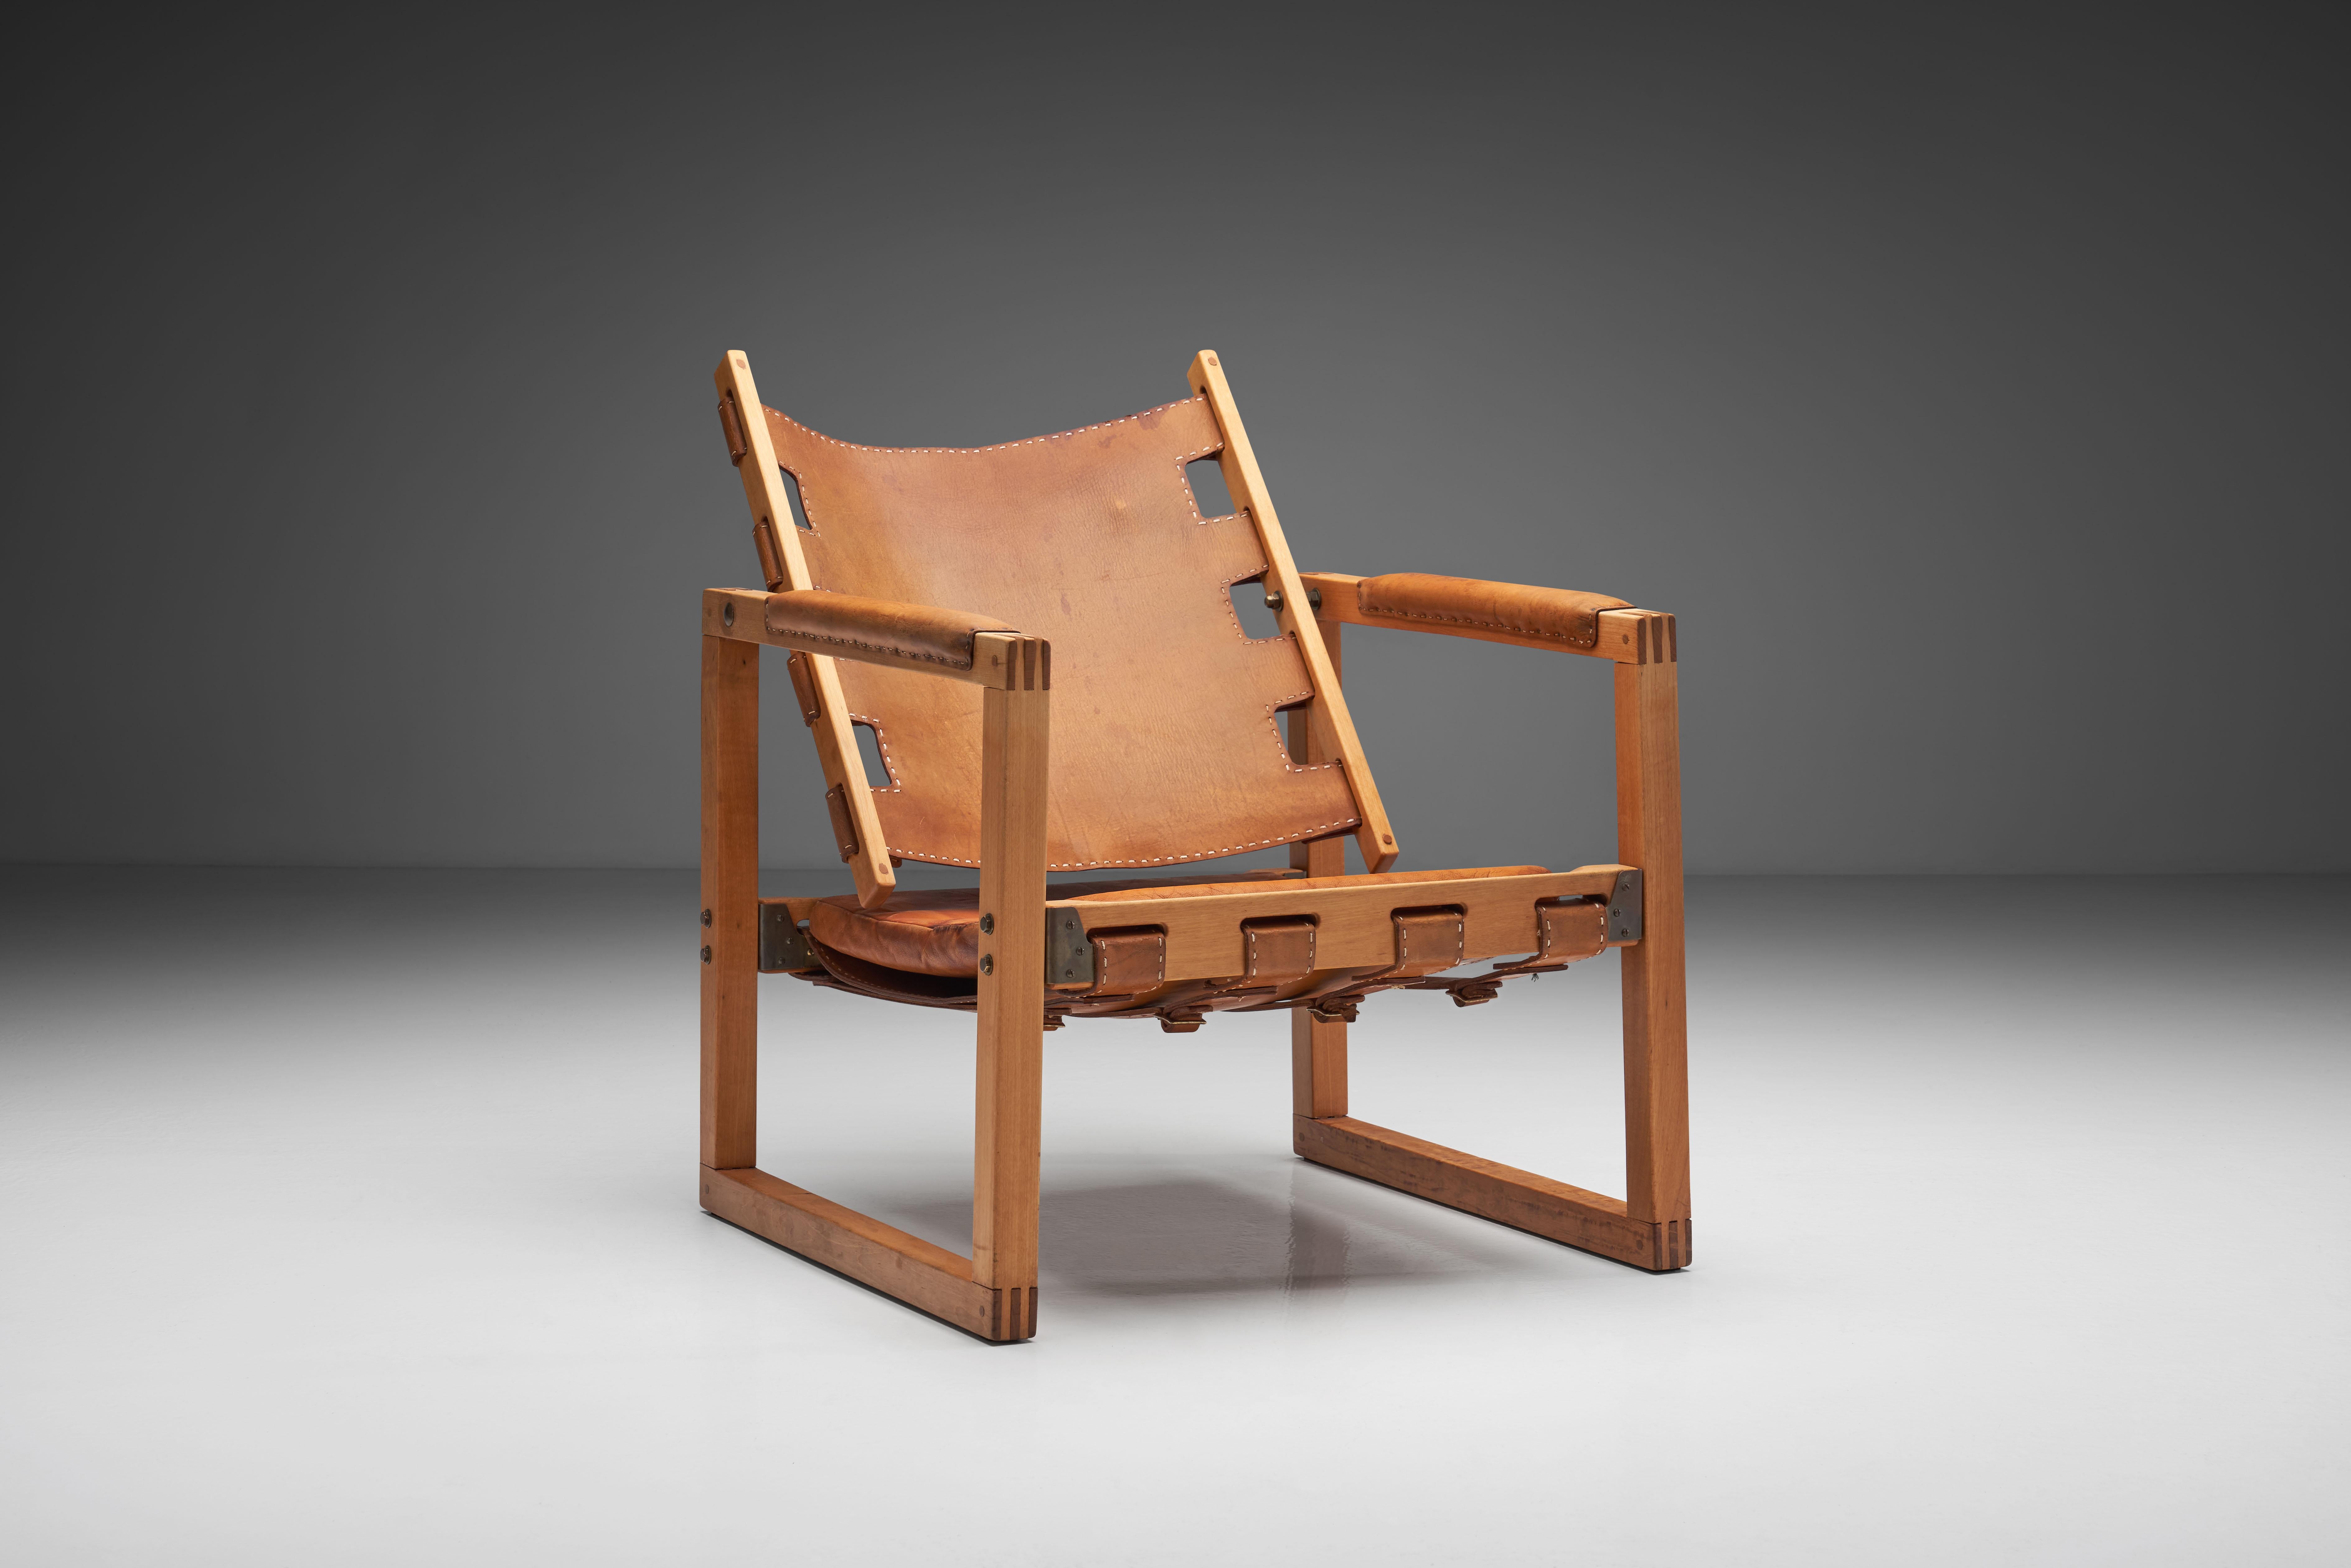 Designed by Danish designer Peder Hansen, who immigrated to New Zealand in the 1960s, this safari chair in cognac leather and eucalyptus frame was produced by Taraire Crafts in Auckland, New Zealand 1967.

The chair has an elementary structure